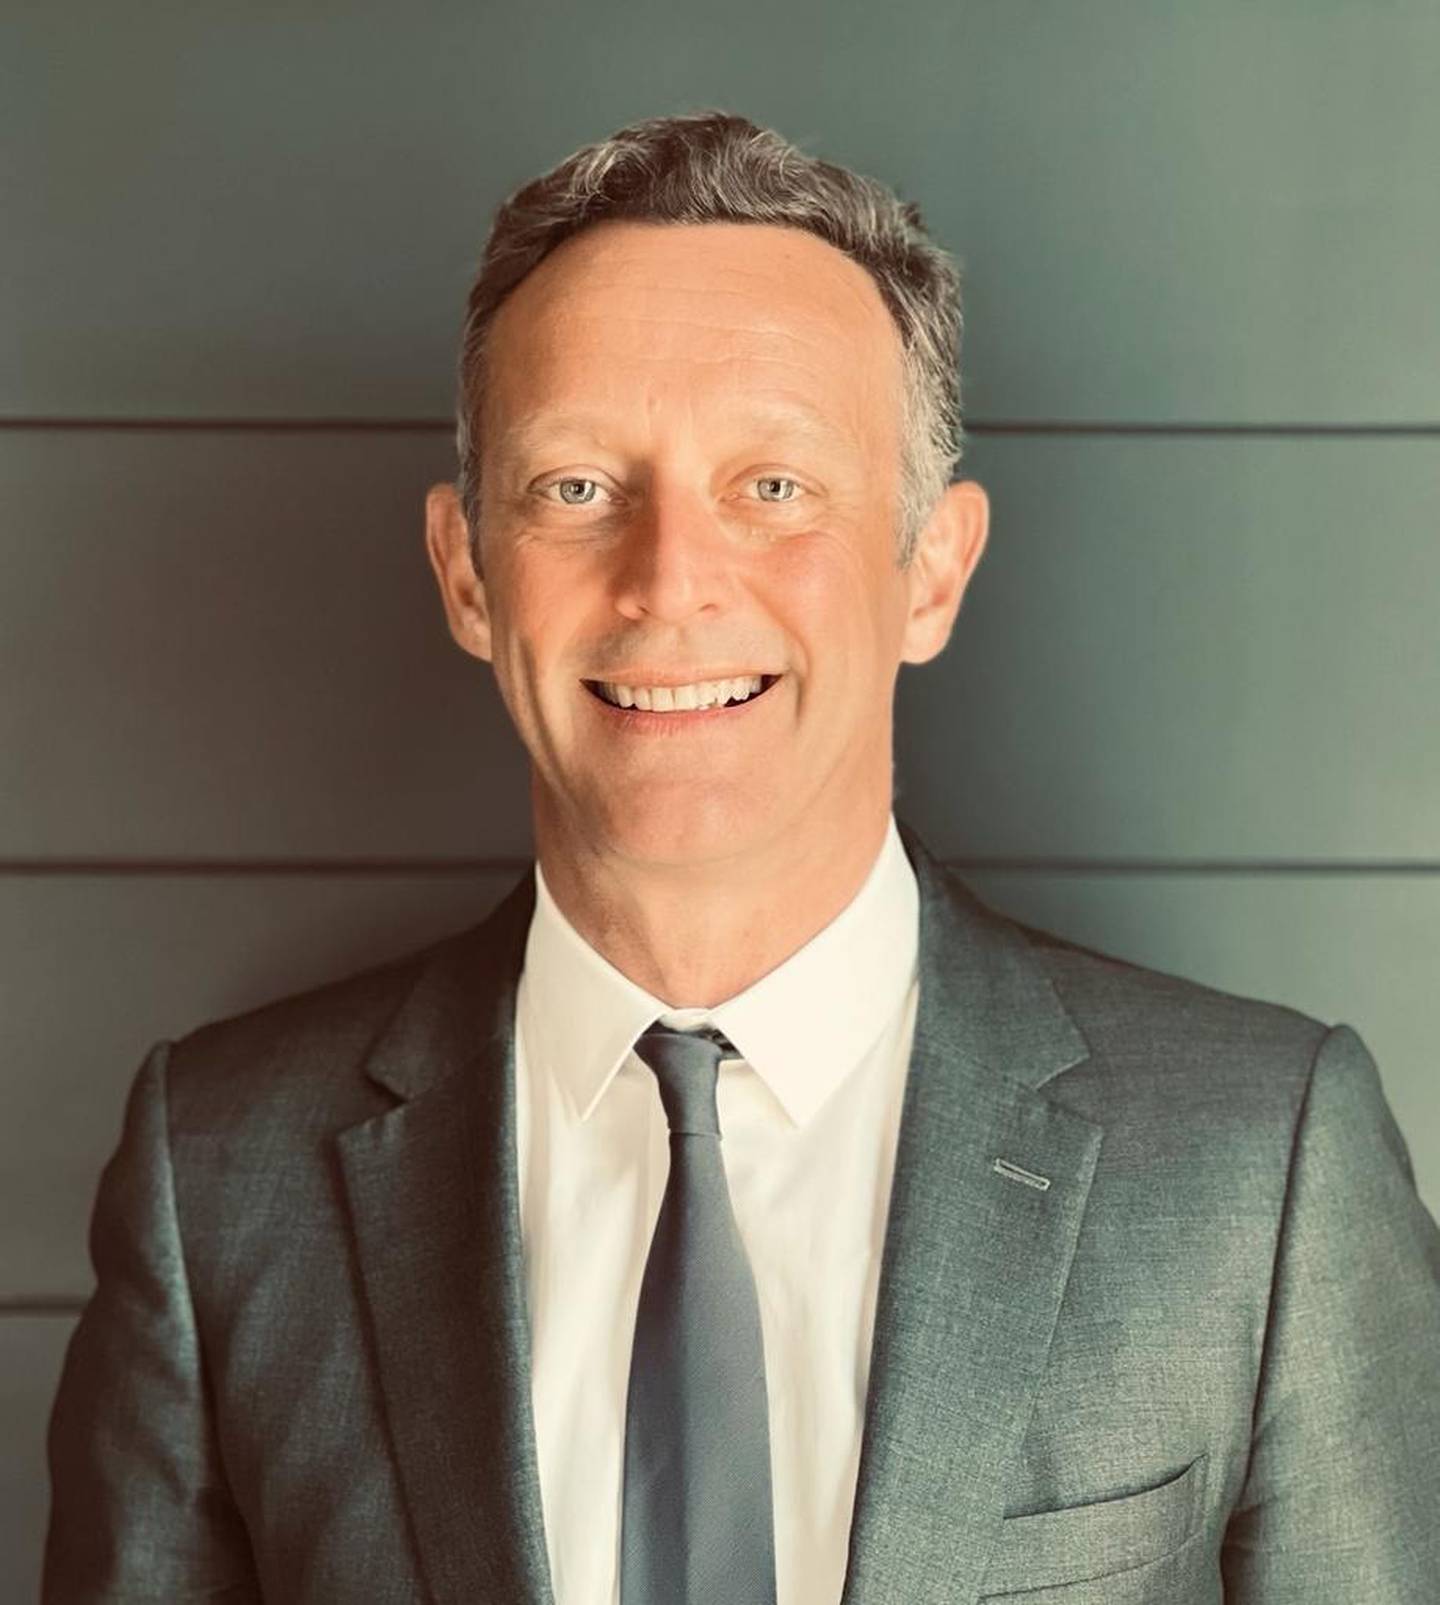 LVMH has appointed Stéphane Rinderknech chairman and CEO of LVMH Hospitality Excellence.